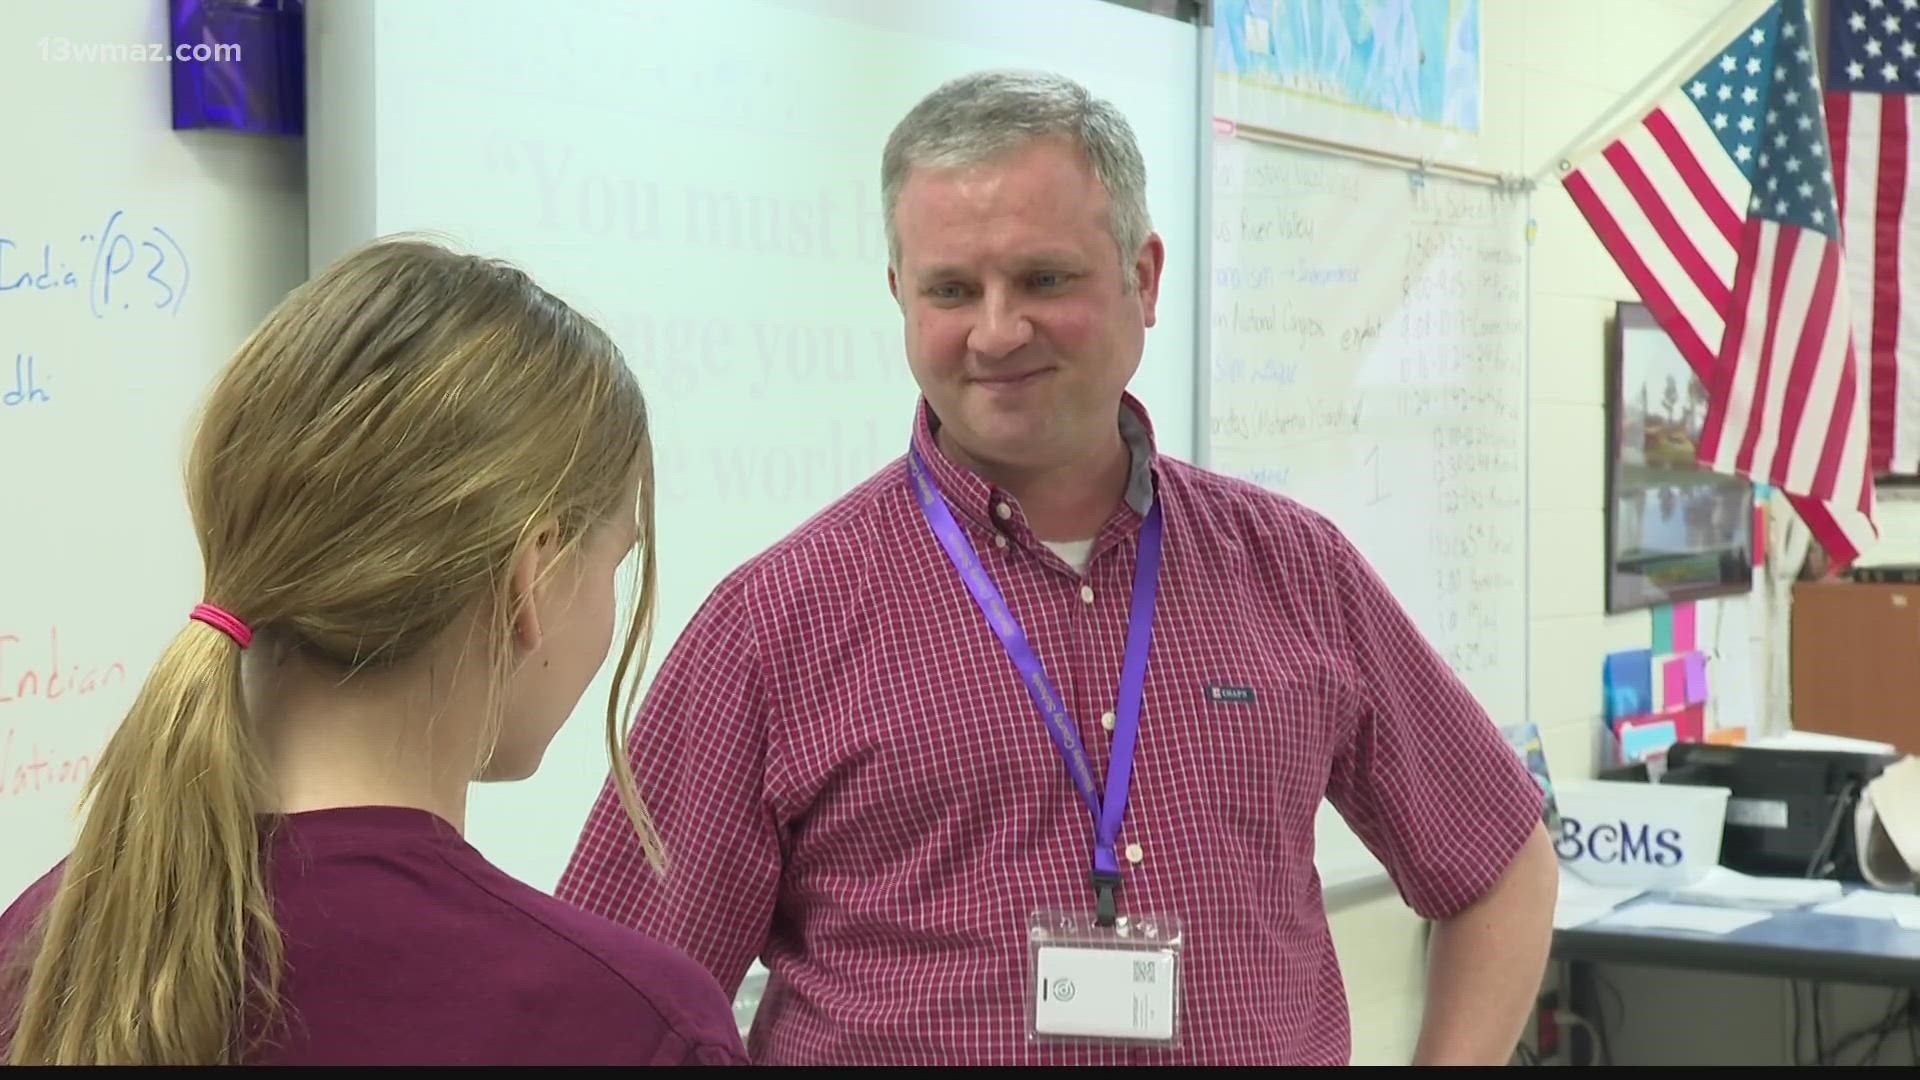 The Bleckley County community gave him the feeling that he needed to be teaching where he served.